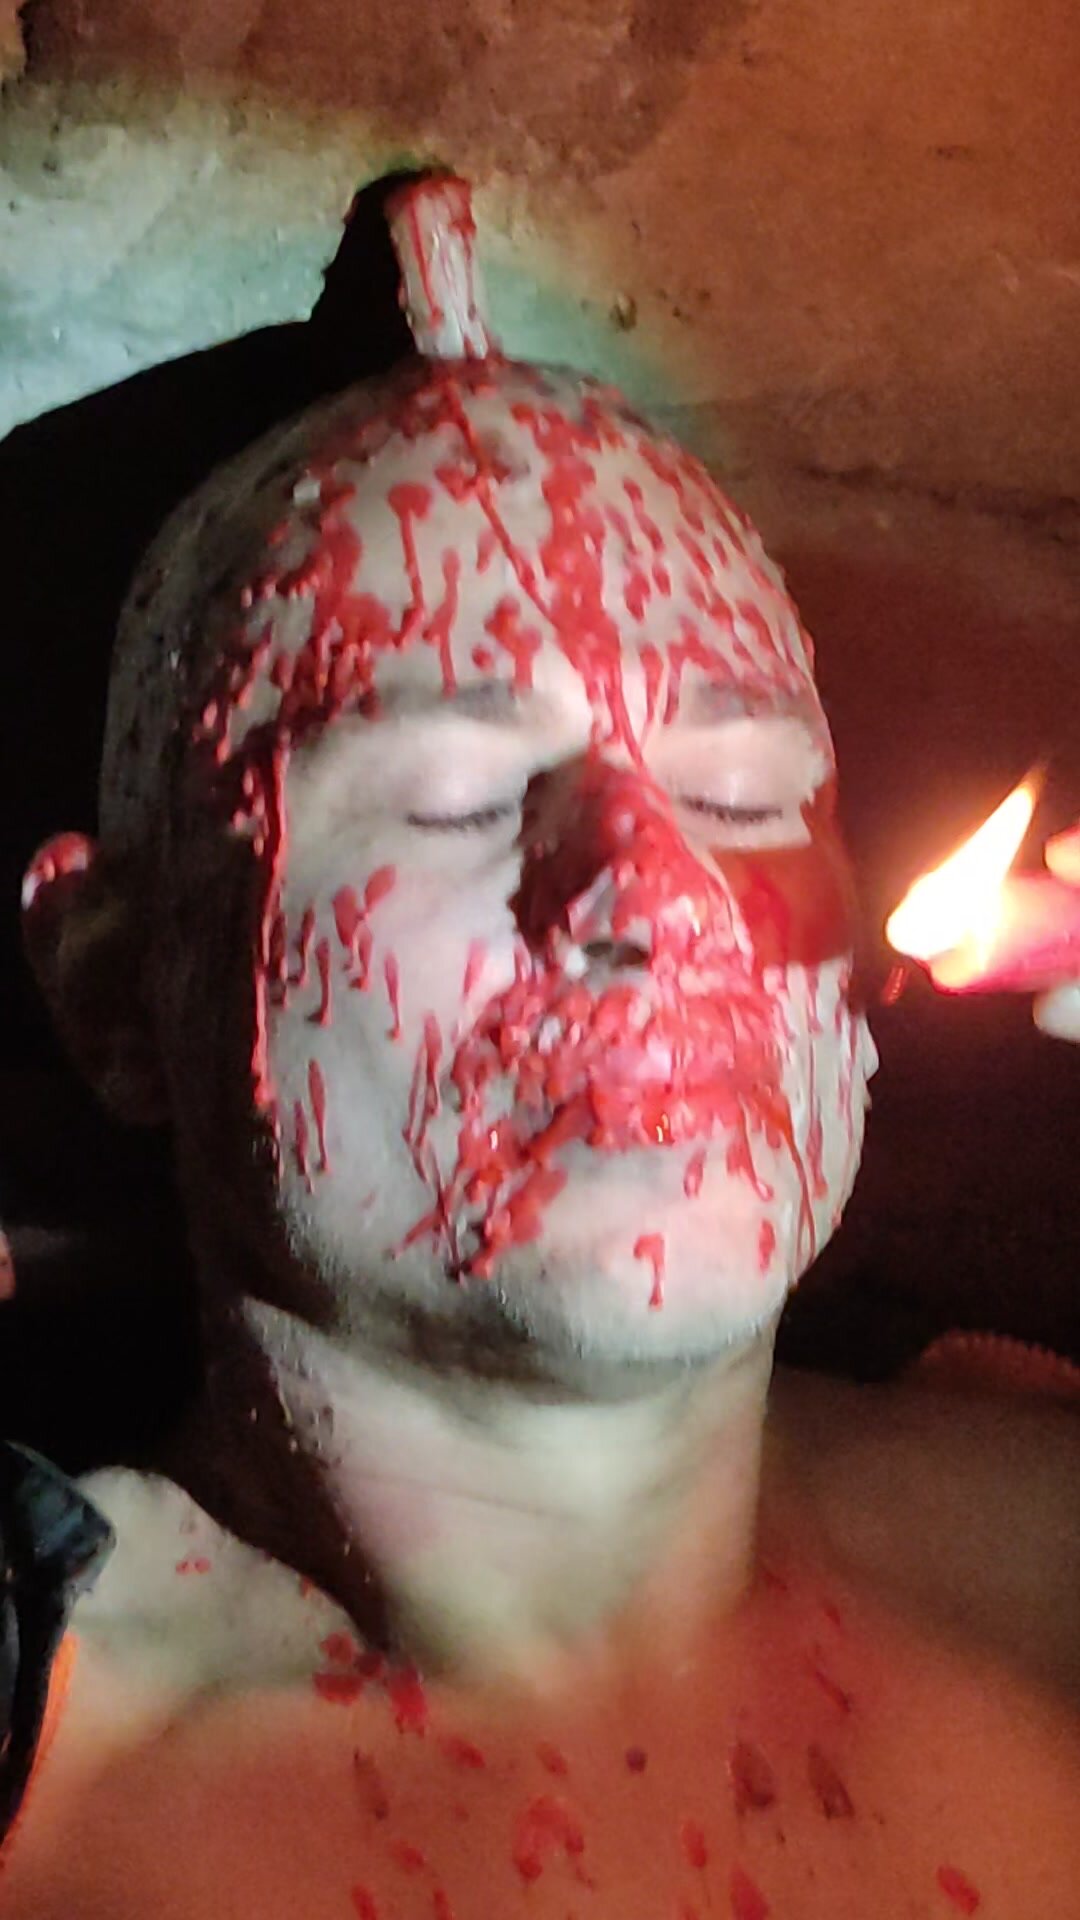 HOT WAX CANDLE ON MY FACE